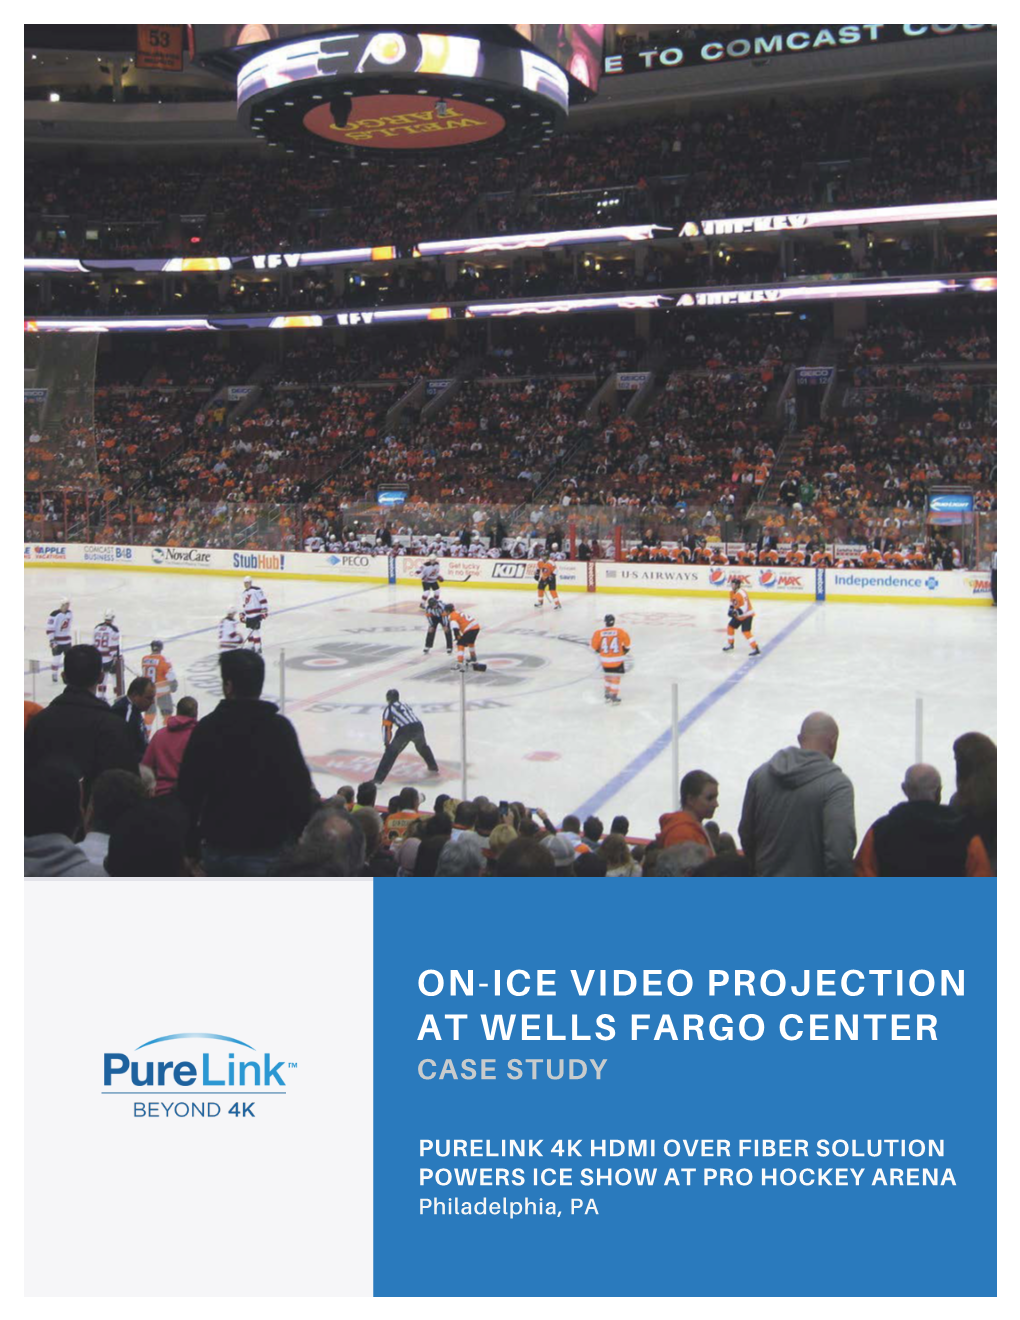 On-Ice Video Projection at Wells Fargo Center Case Study